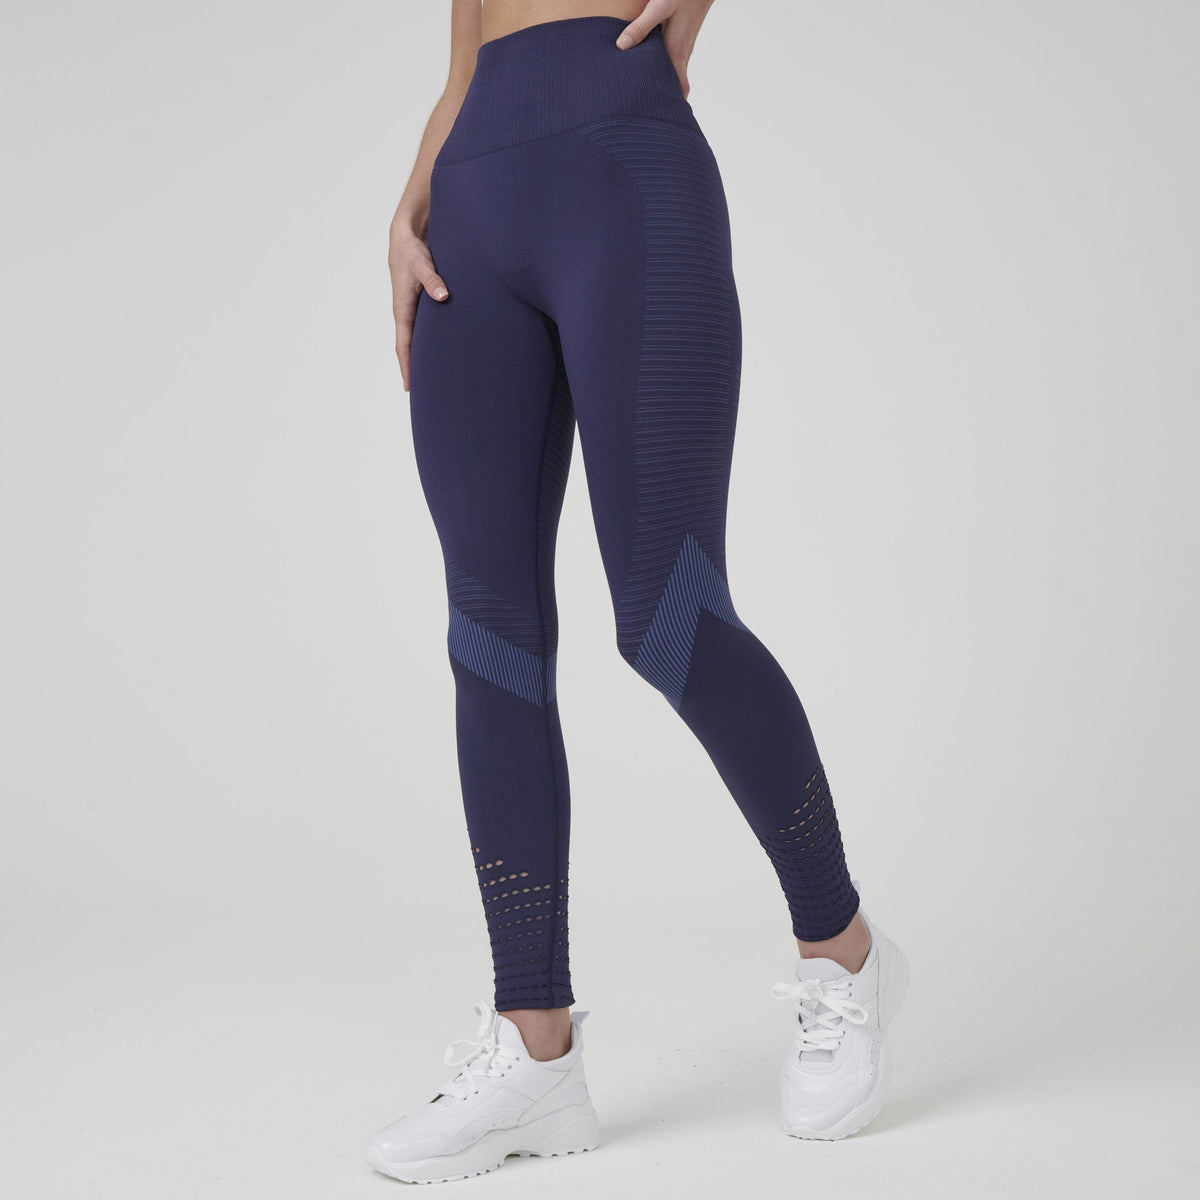 Accent High Waist Leggings by Stylish AF Fitness Co